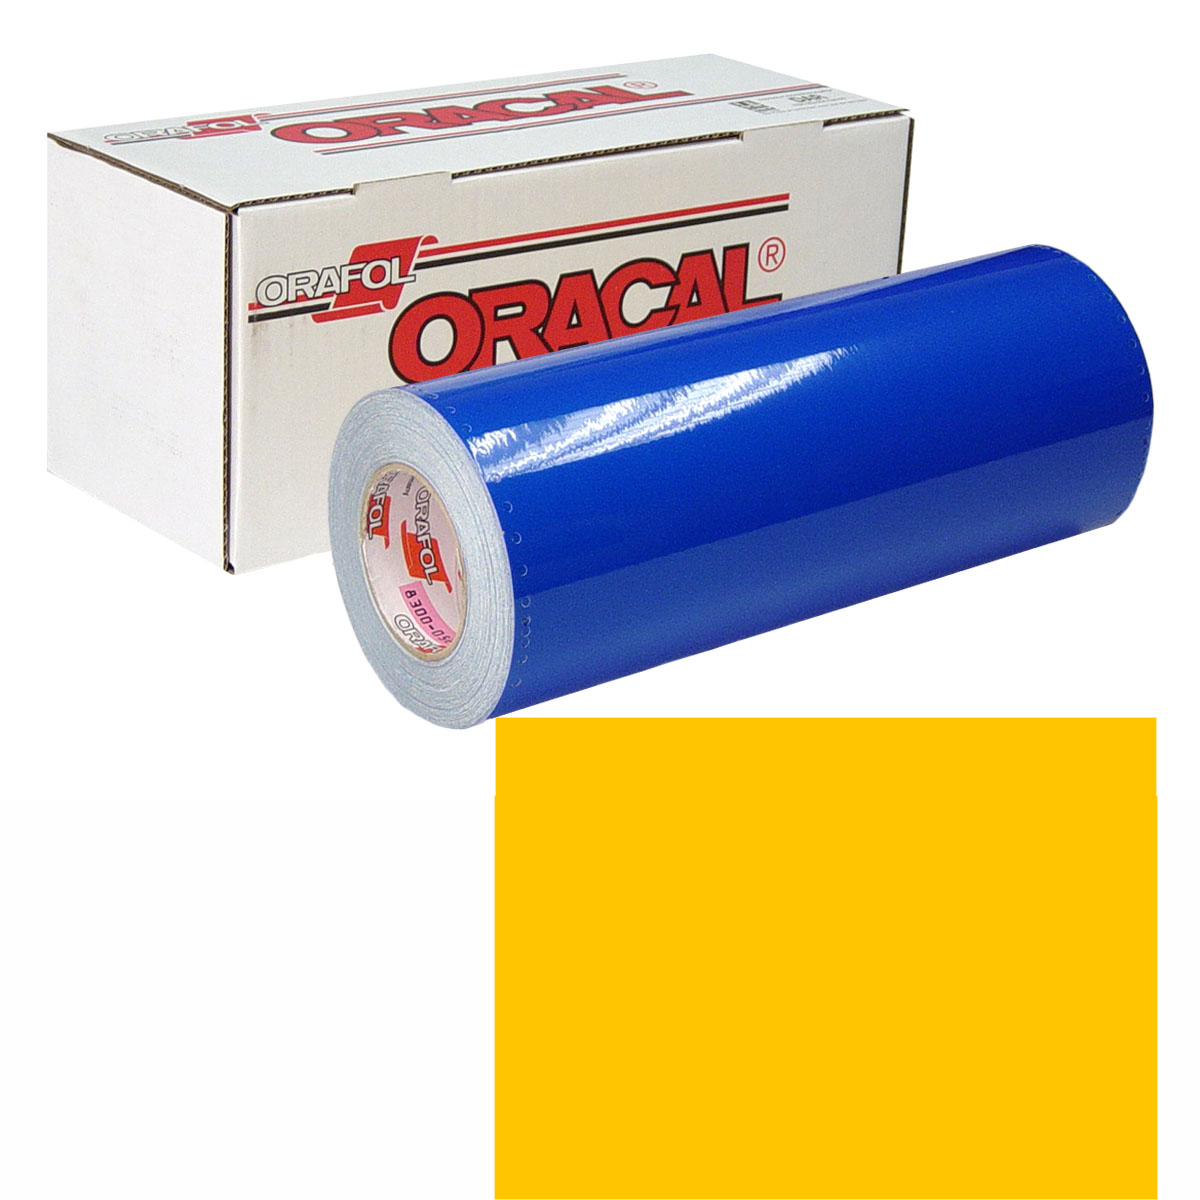 ORACAL 631 15in X 10yd 021 Yellow